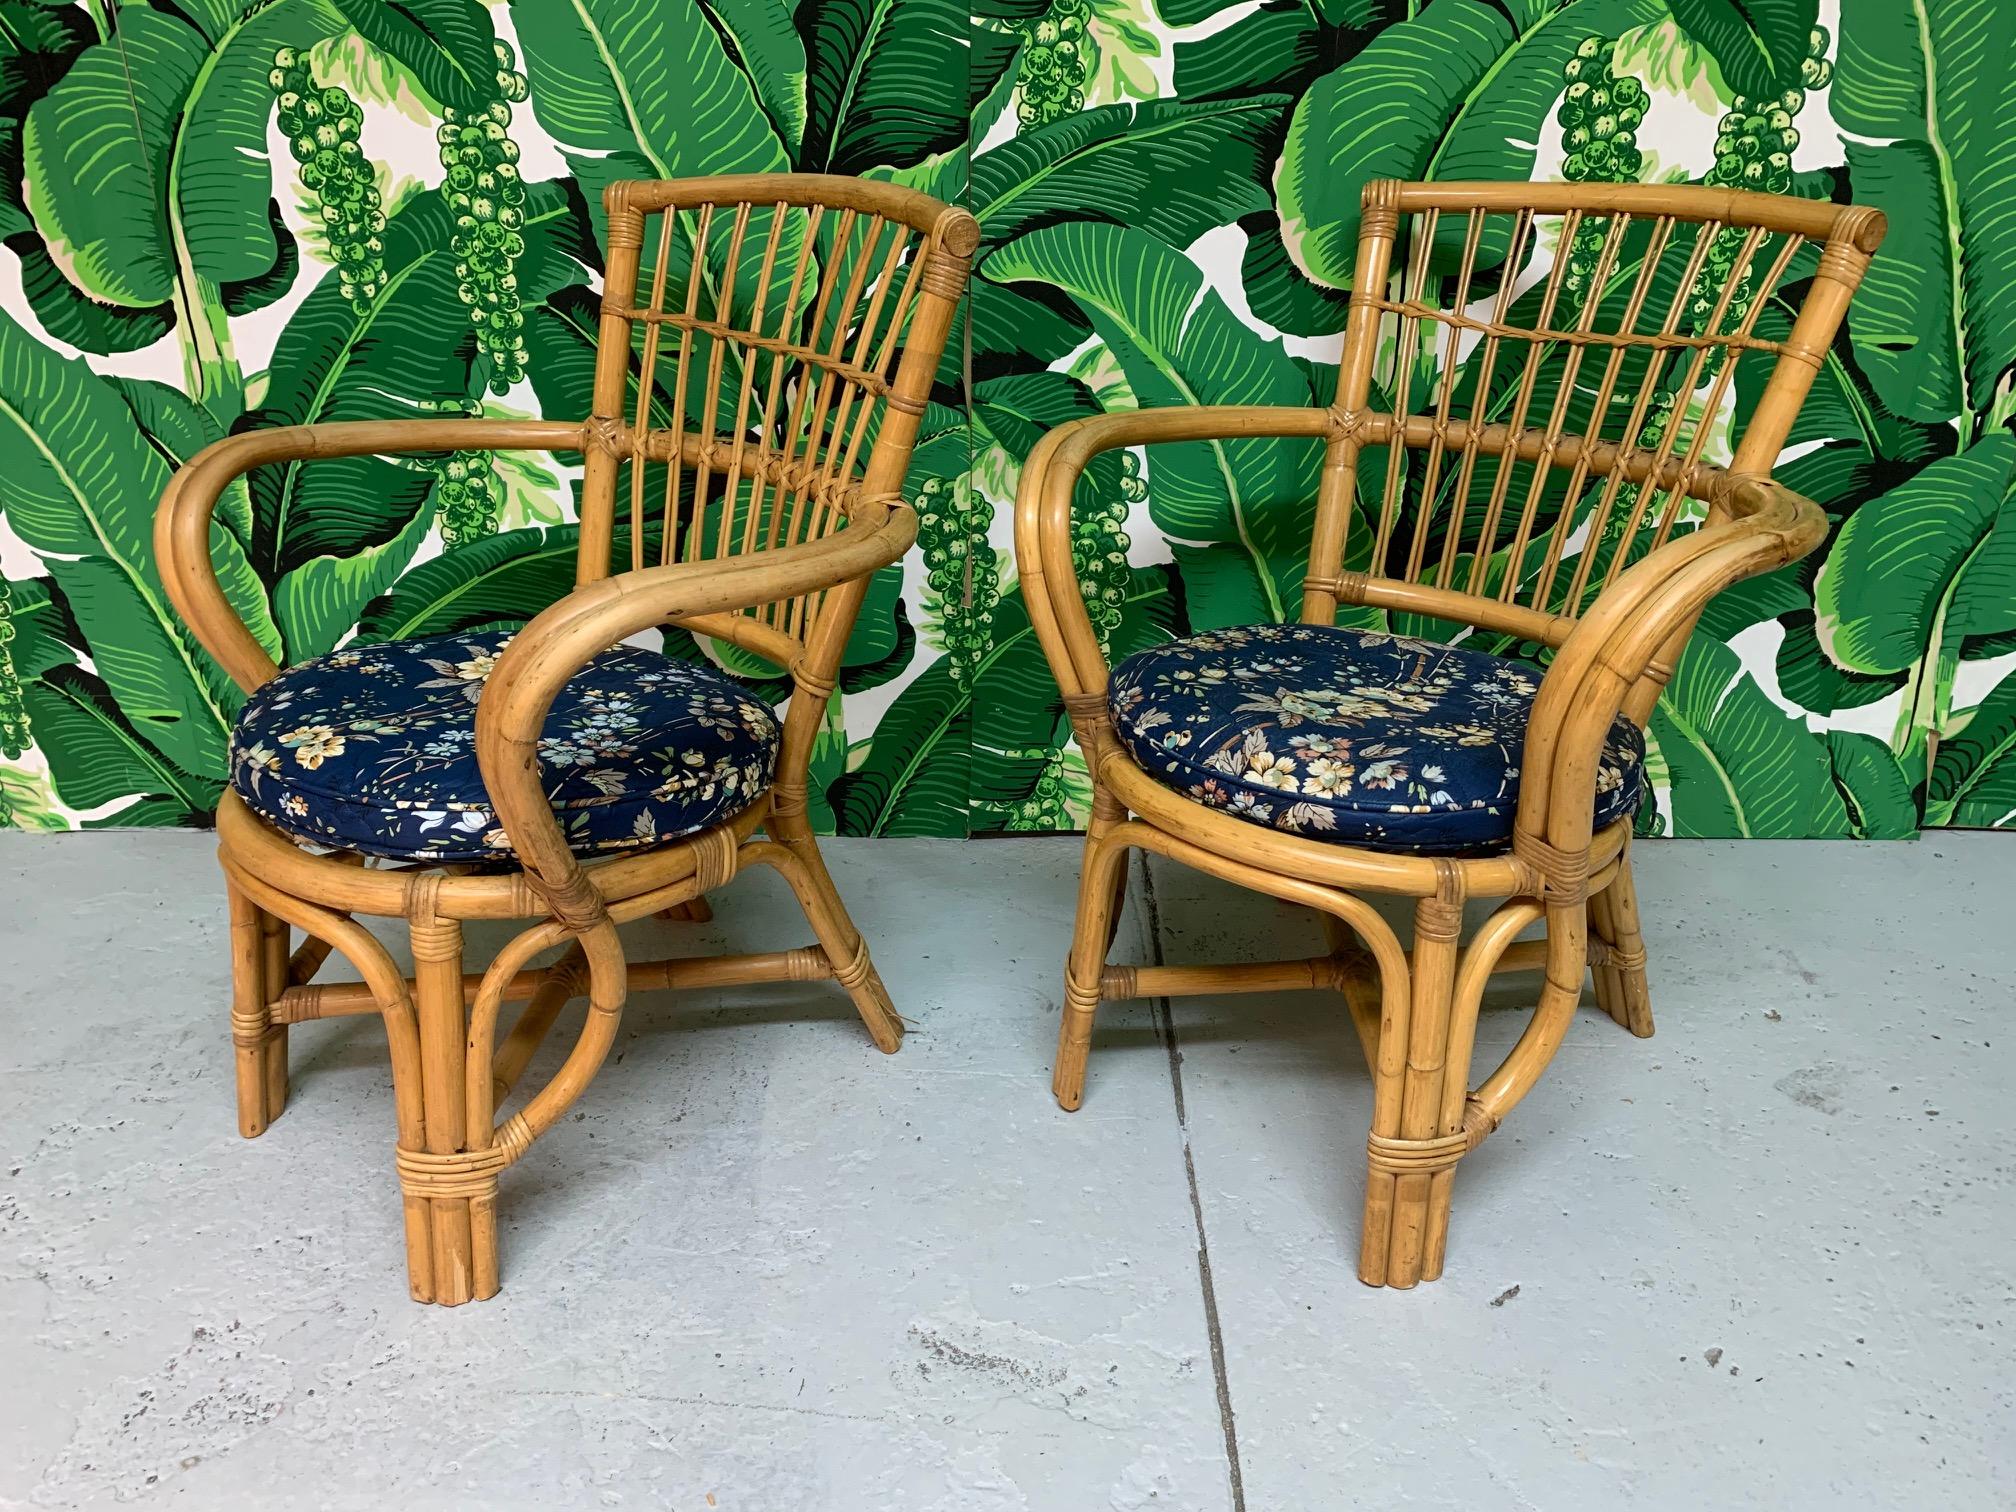 Pair of vintage rattan club chairs similar to the iconic pretzel style made popular by Paul Frankl. Stick backs and floral cushions. Good condition with minor imperfections consistent with age.